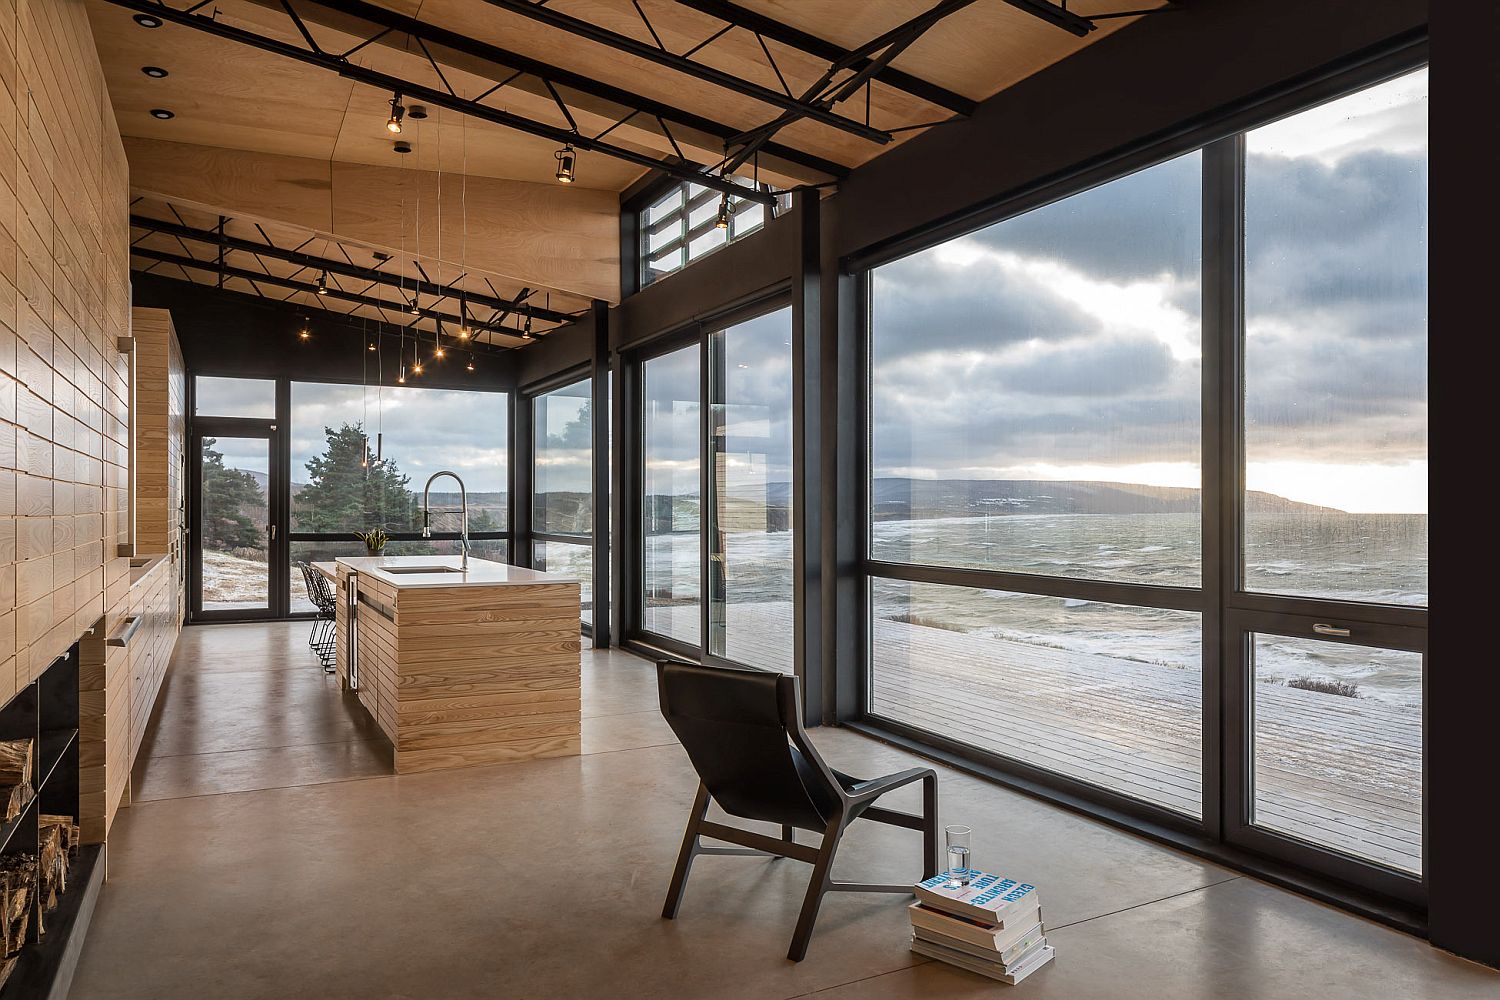 Large-windows-and-glass-doors-open-up-the-kitchen-towards-the-stunning-coastline-and-the-ocean-beyond